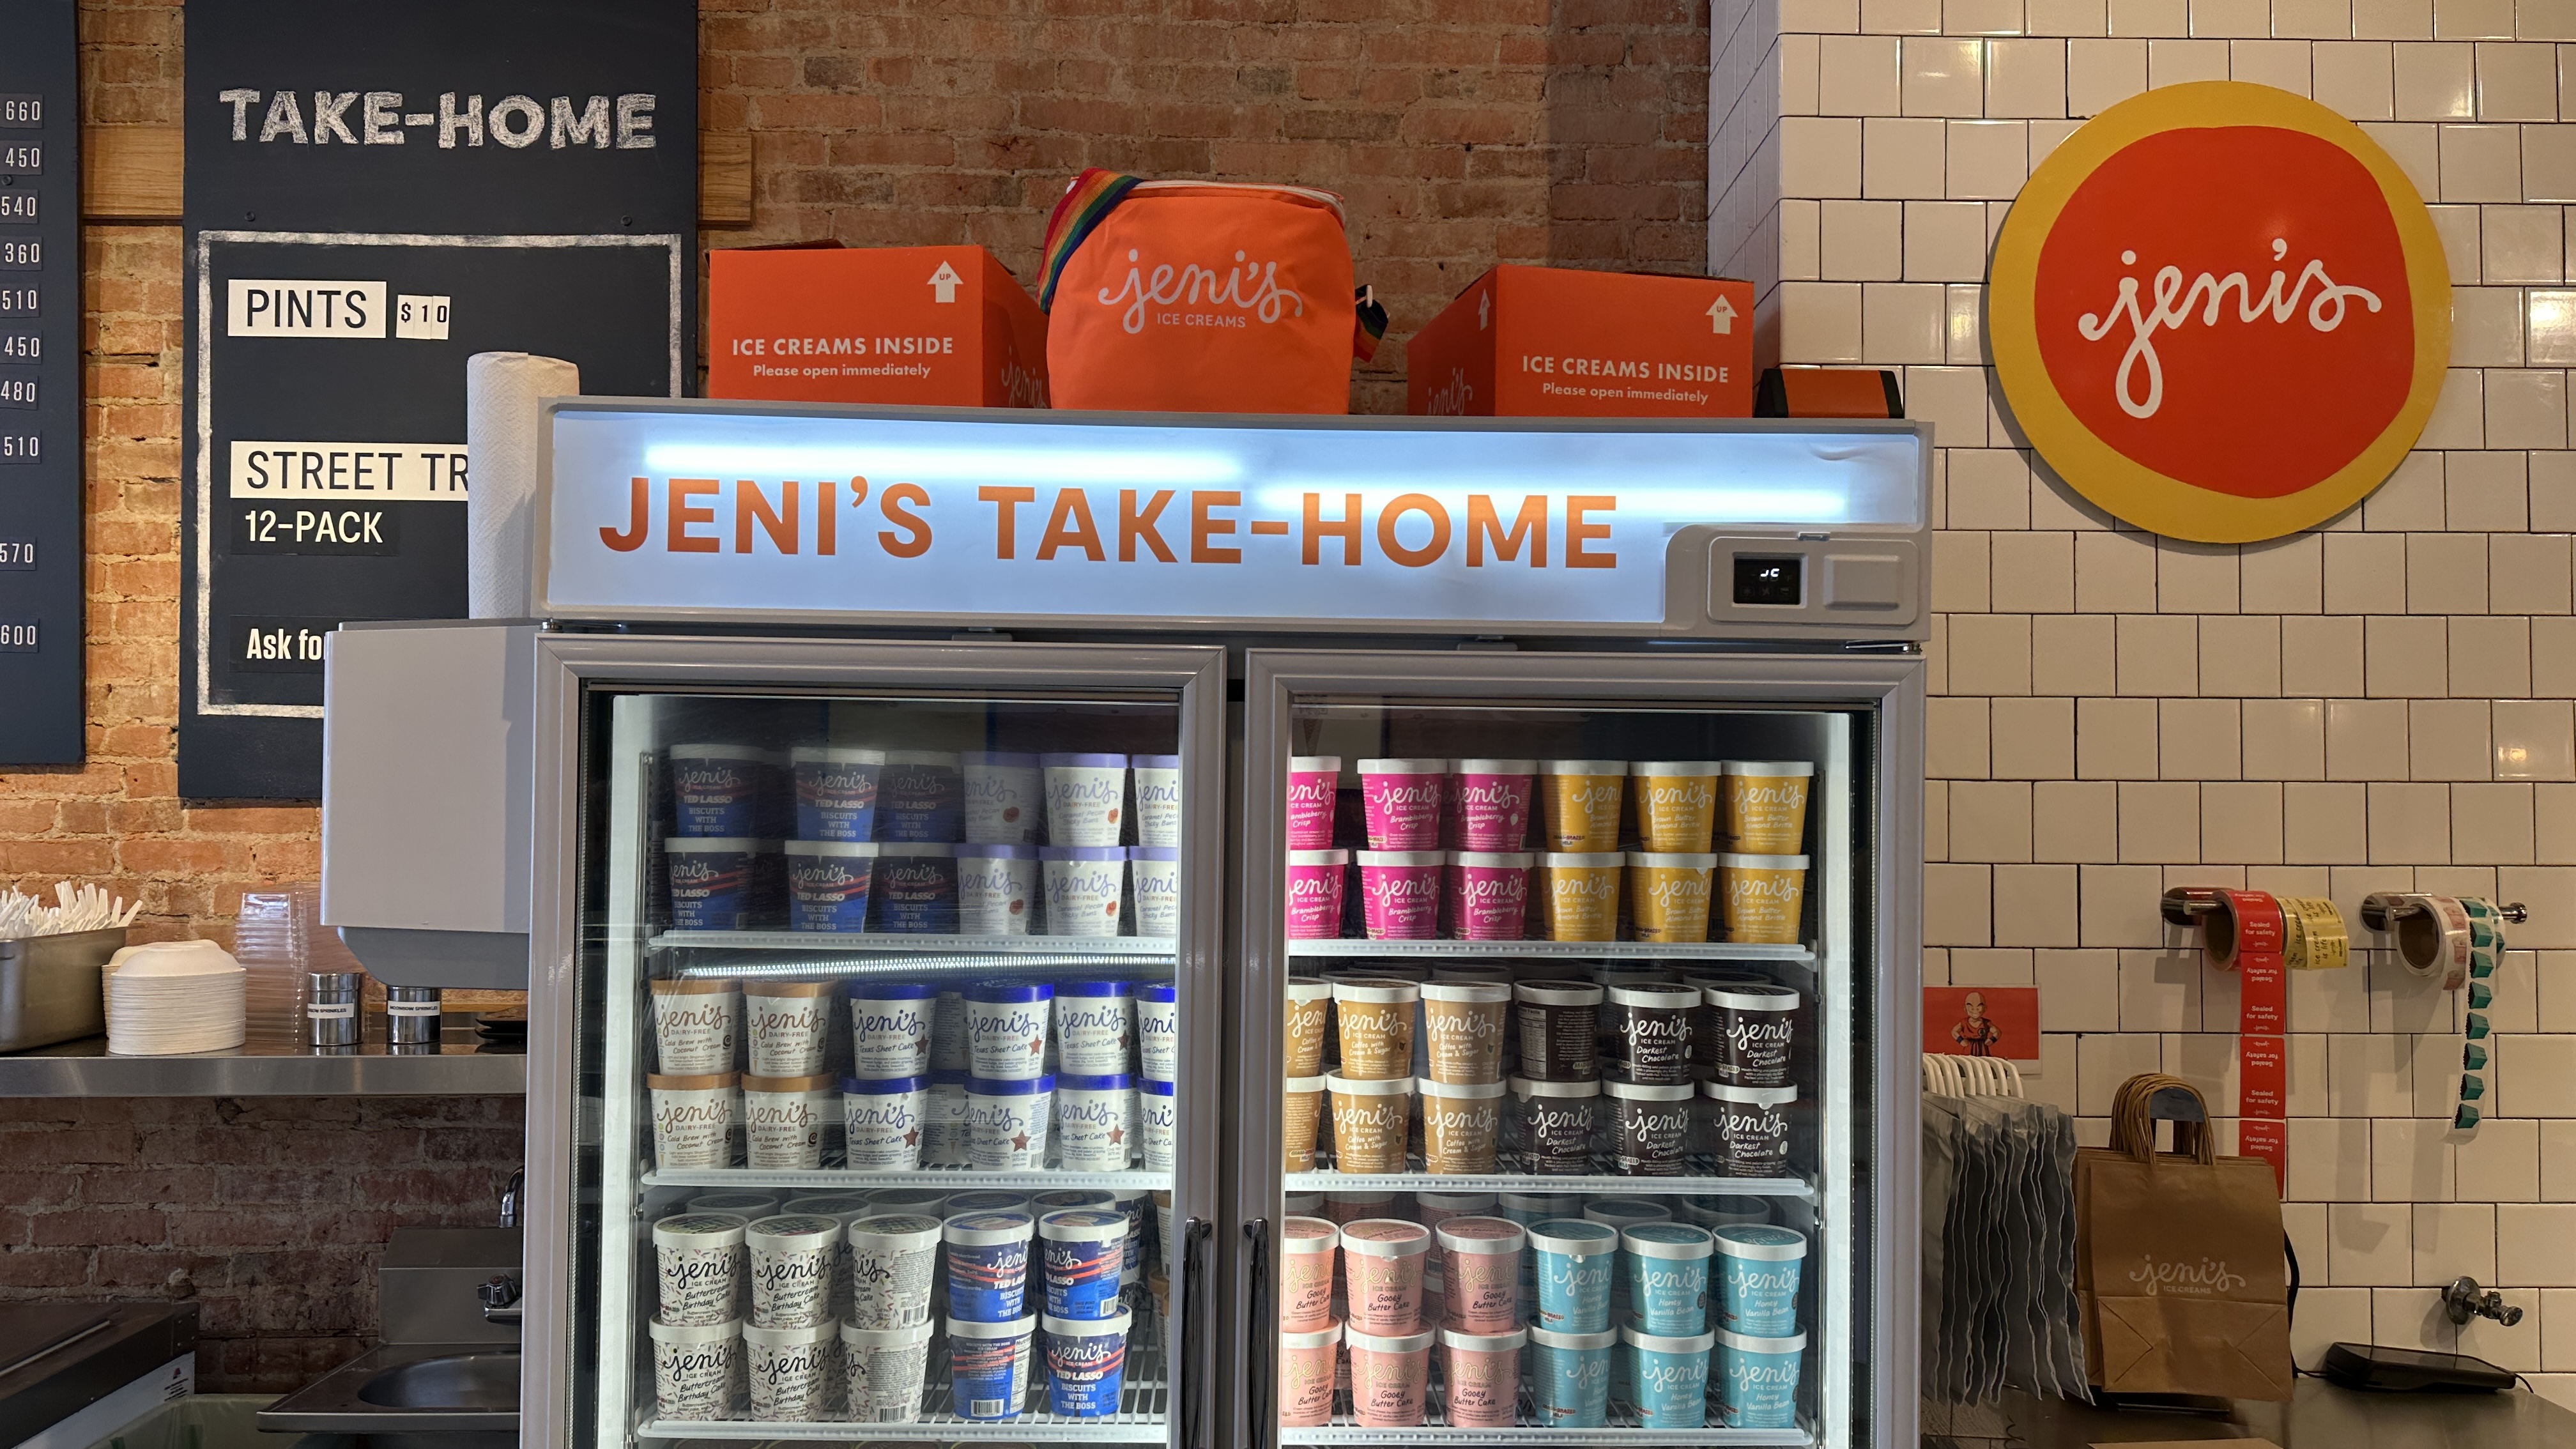 Jeni's Splendid Ice Creams including Ted Lasso Biscuits with the Boss in a freezer